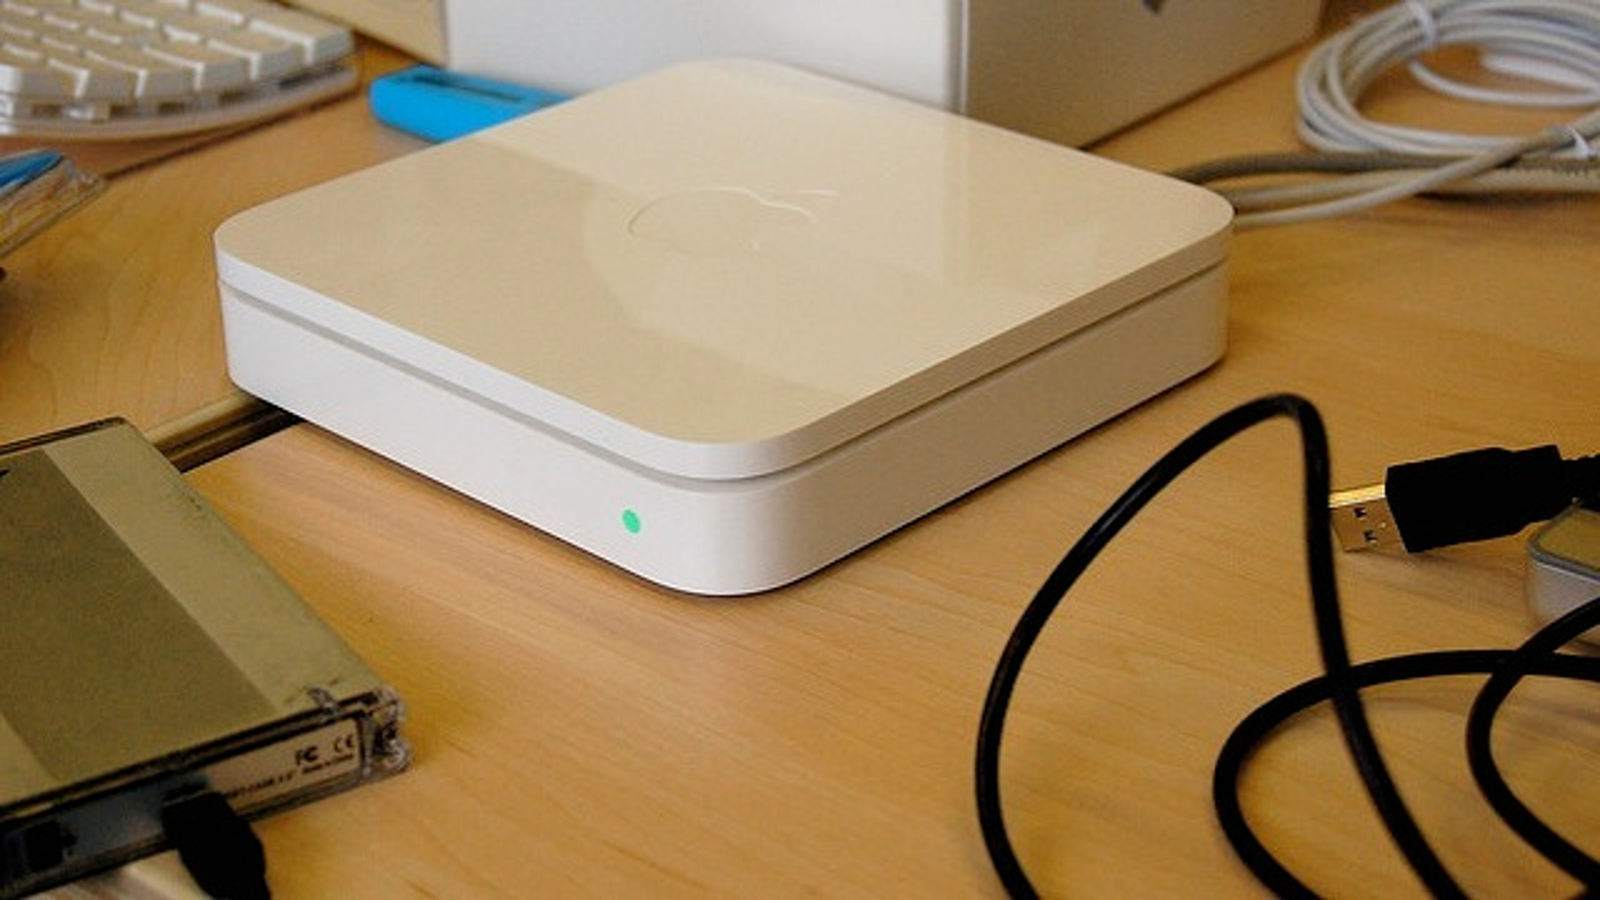 apple airport express setup guide